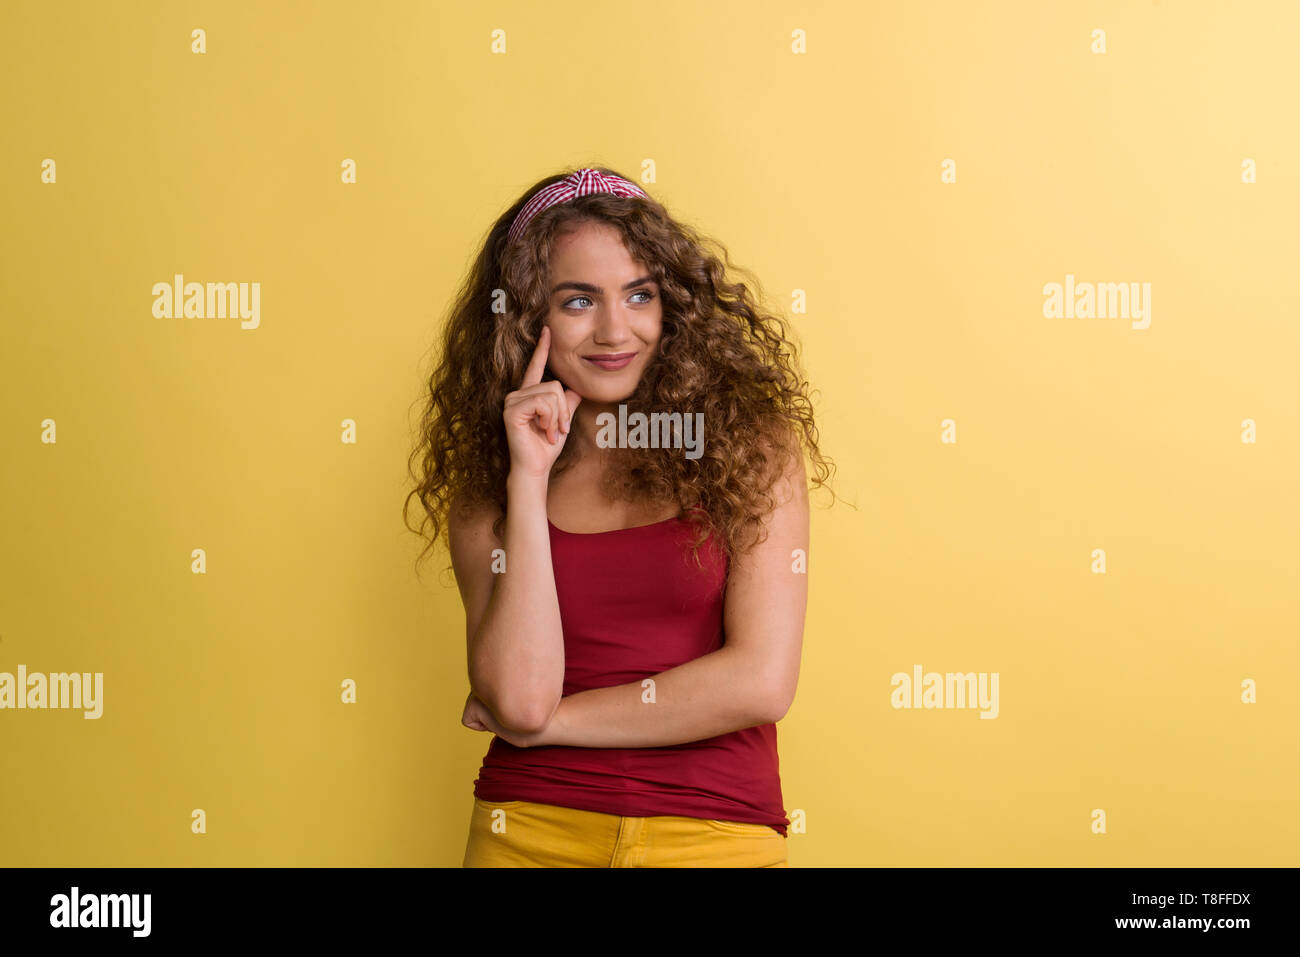 Portrait of a young woman with headband in a studio on a yellow background. Stock Photo